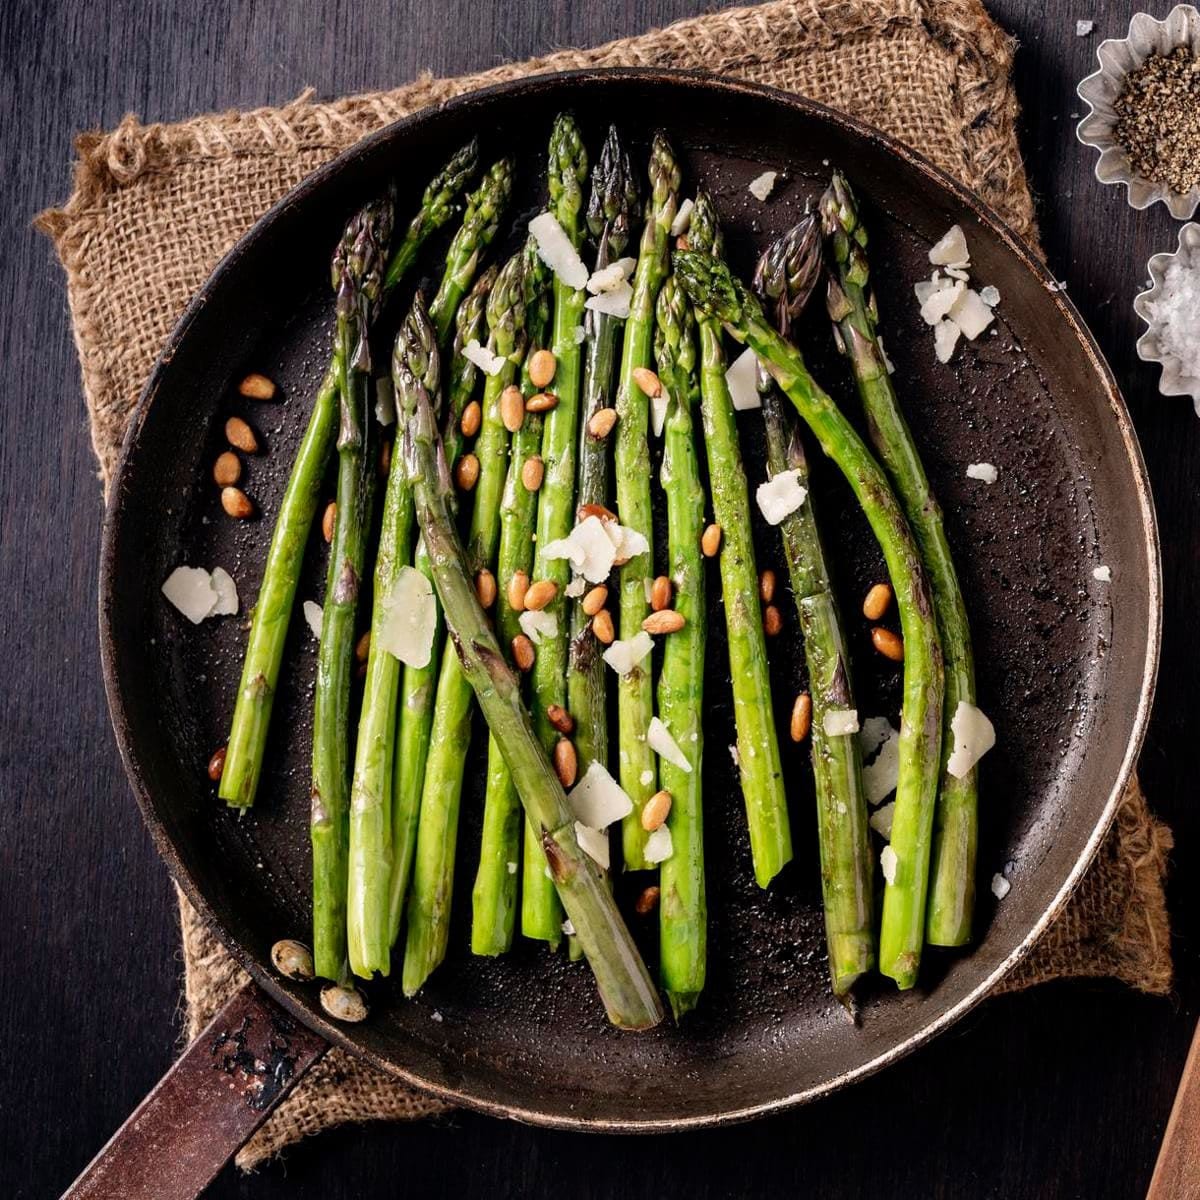 Pan fried asparagus served from the skillet.